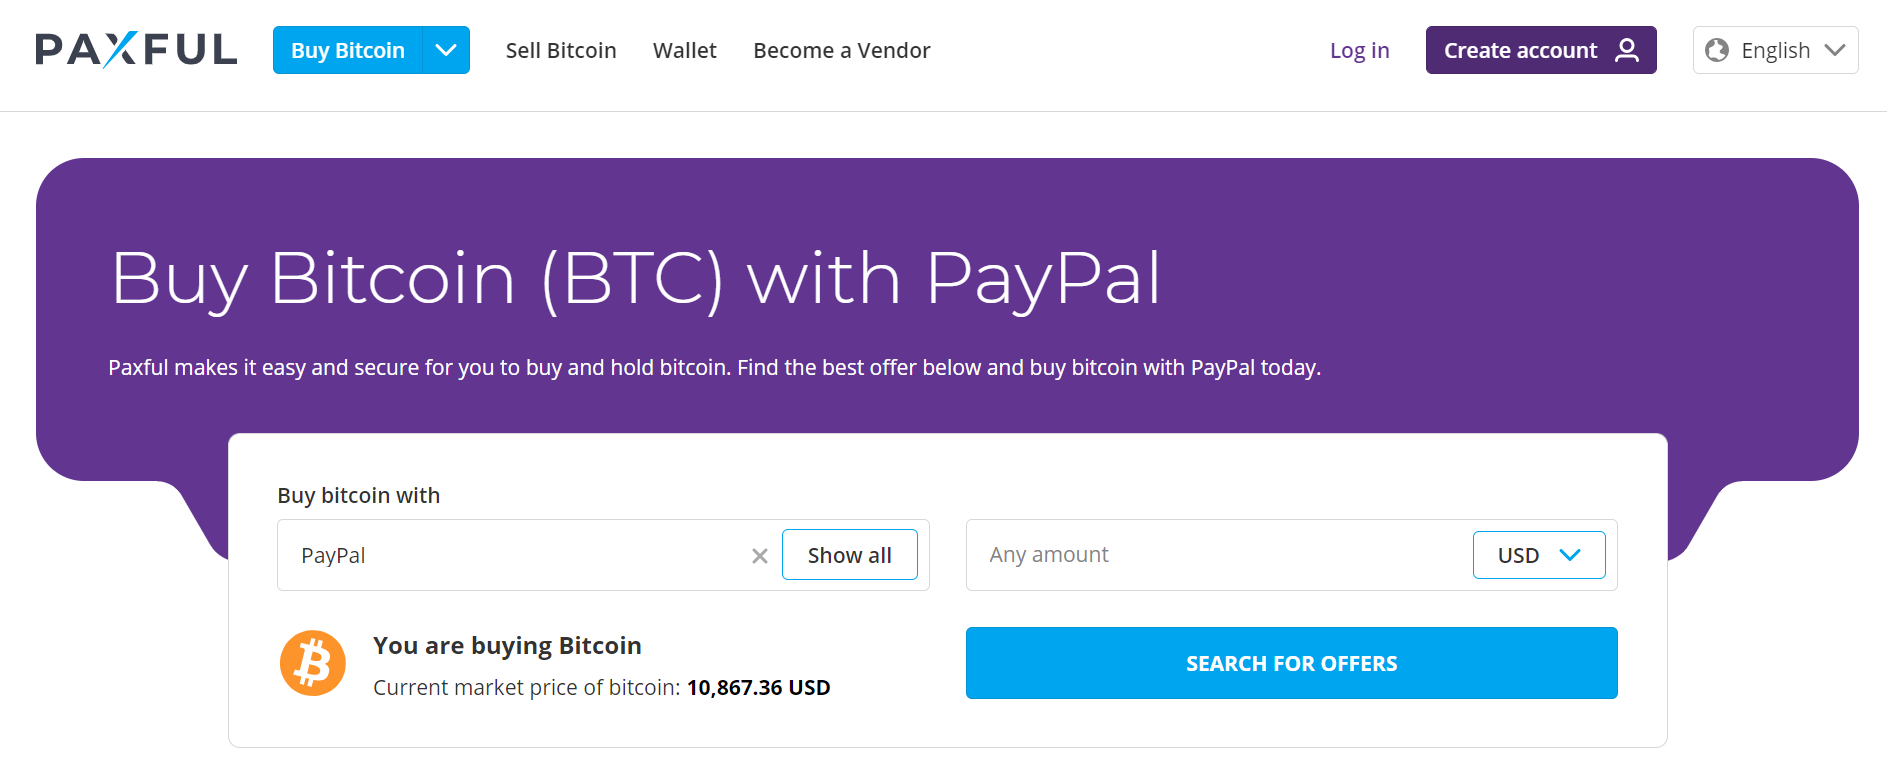 how to cash out bitcoin on paypal